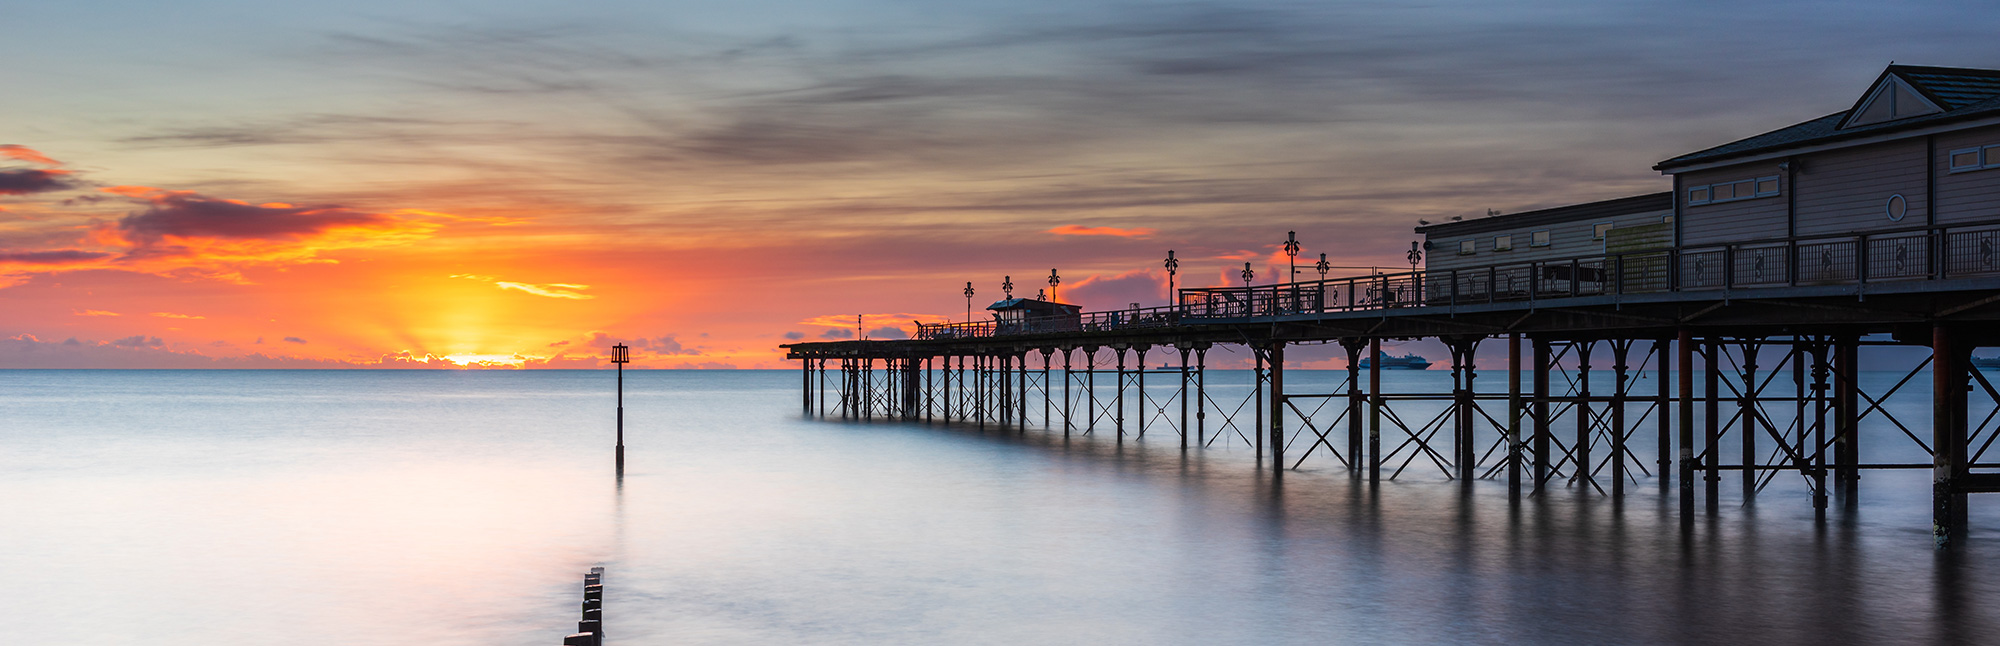 Teignmouth Pier And Sunset